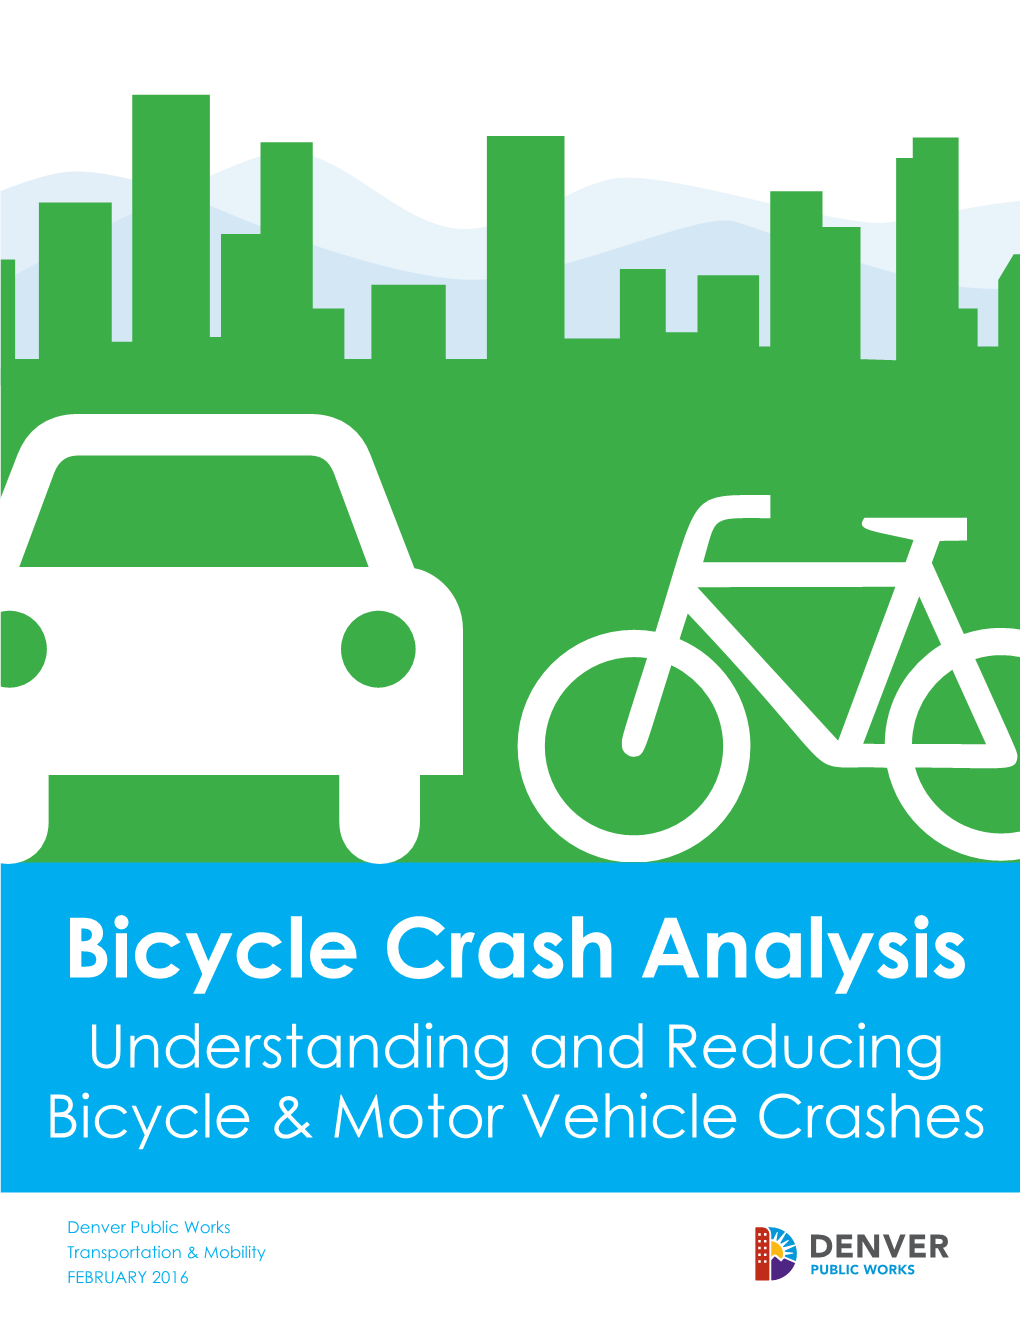 Understanding and Reducing Bicycle and Motor Vehicle Crashes